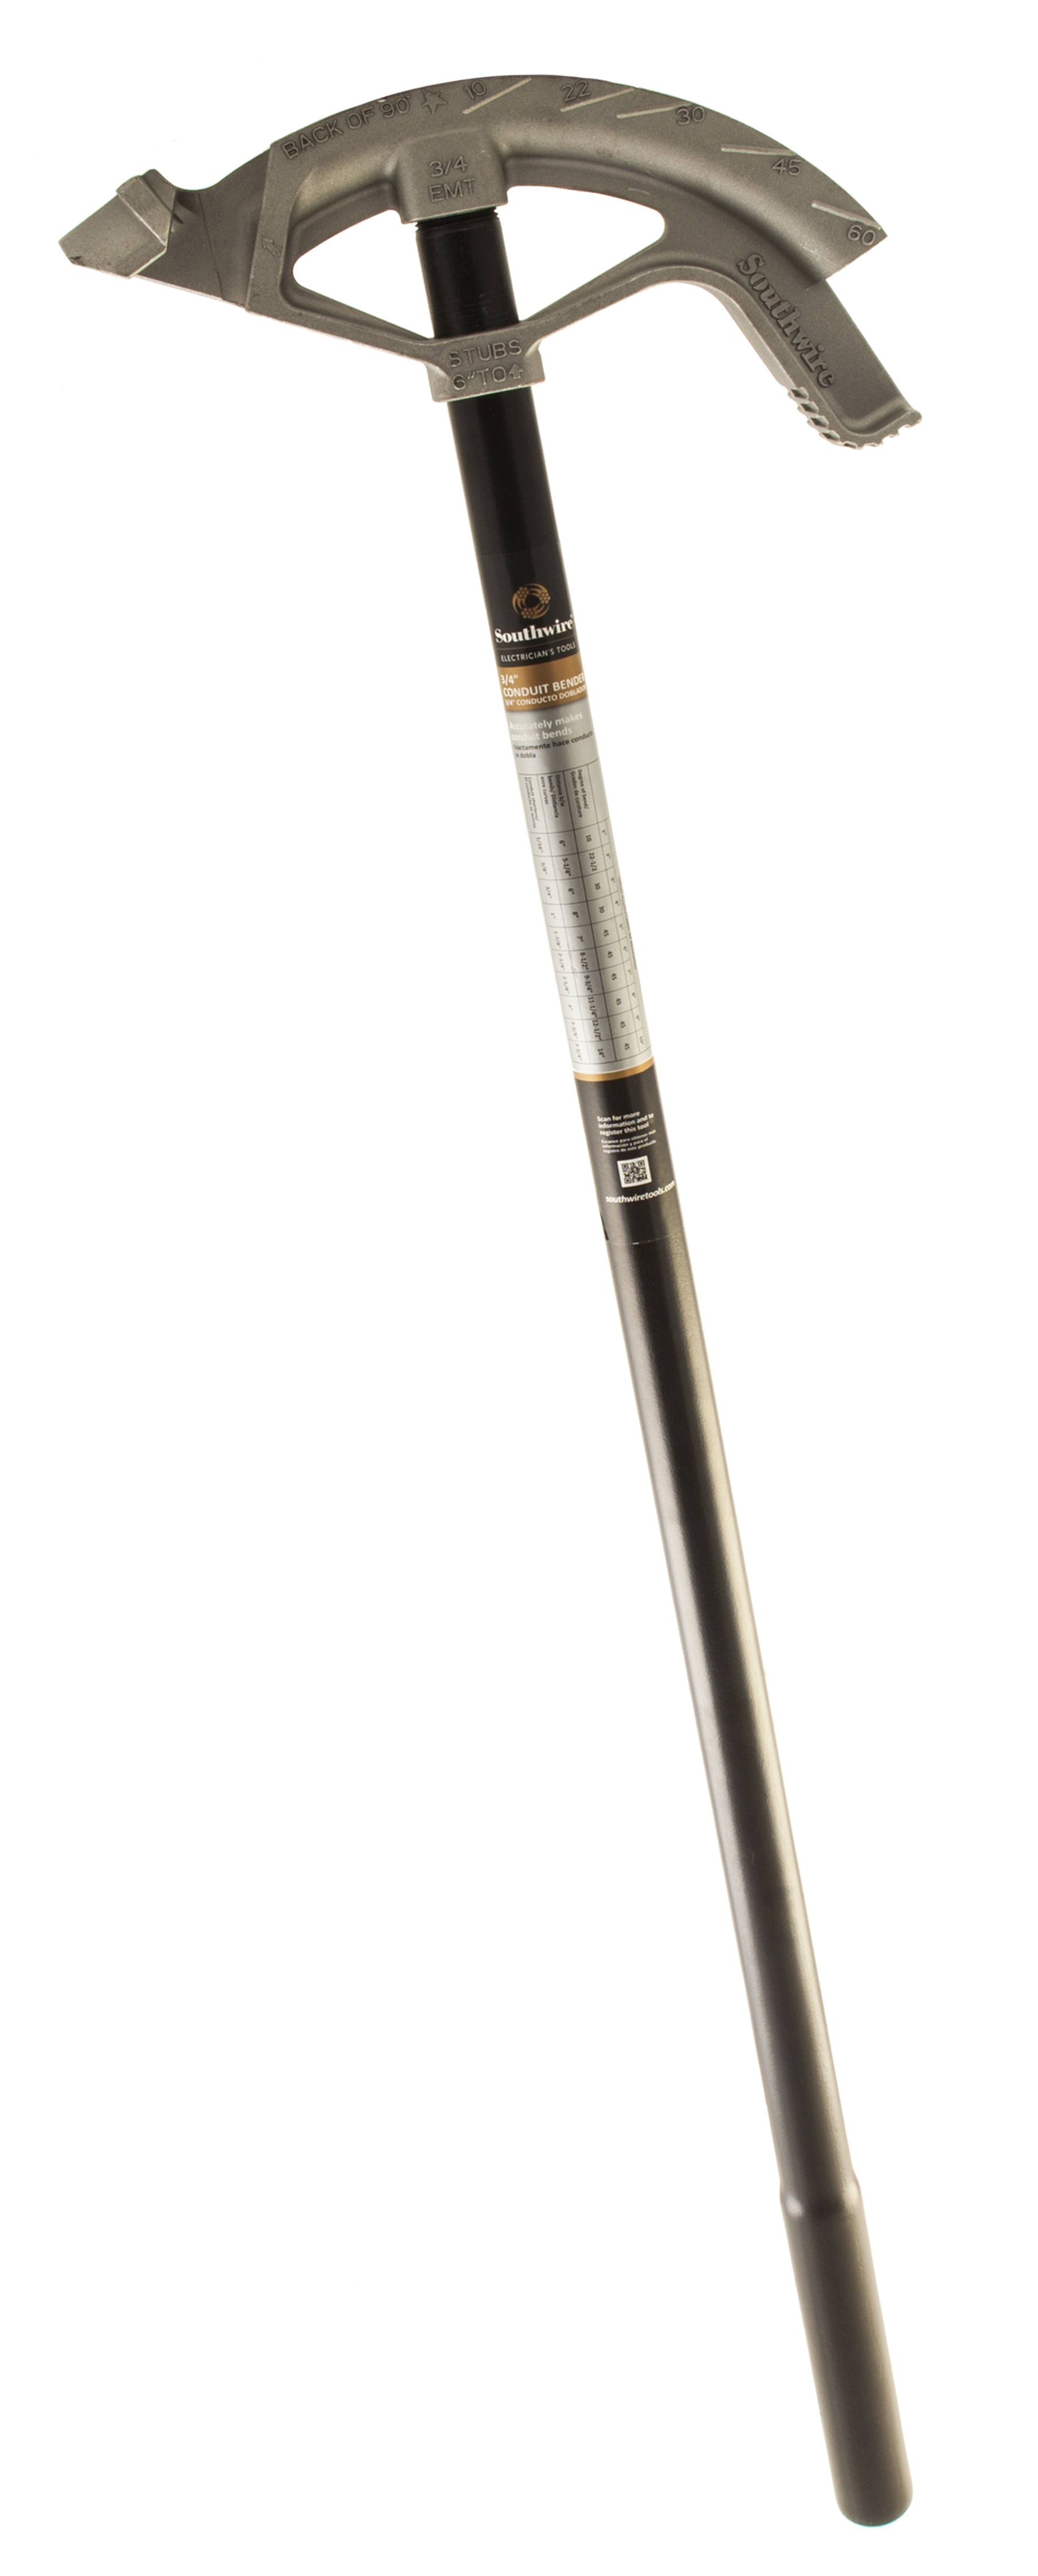 The MCB3/4 is a 3/4" EMT Aluminum Head Conduit Bender that reliably and repeatedly performs common bends, such as stub-ups, offsets, back-to-back and saddle bends.